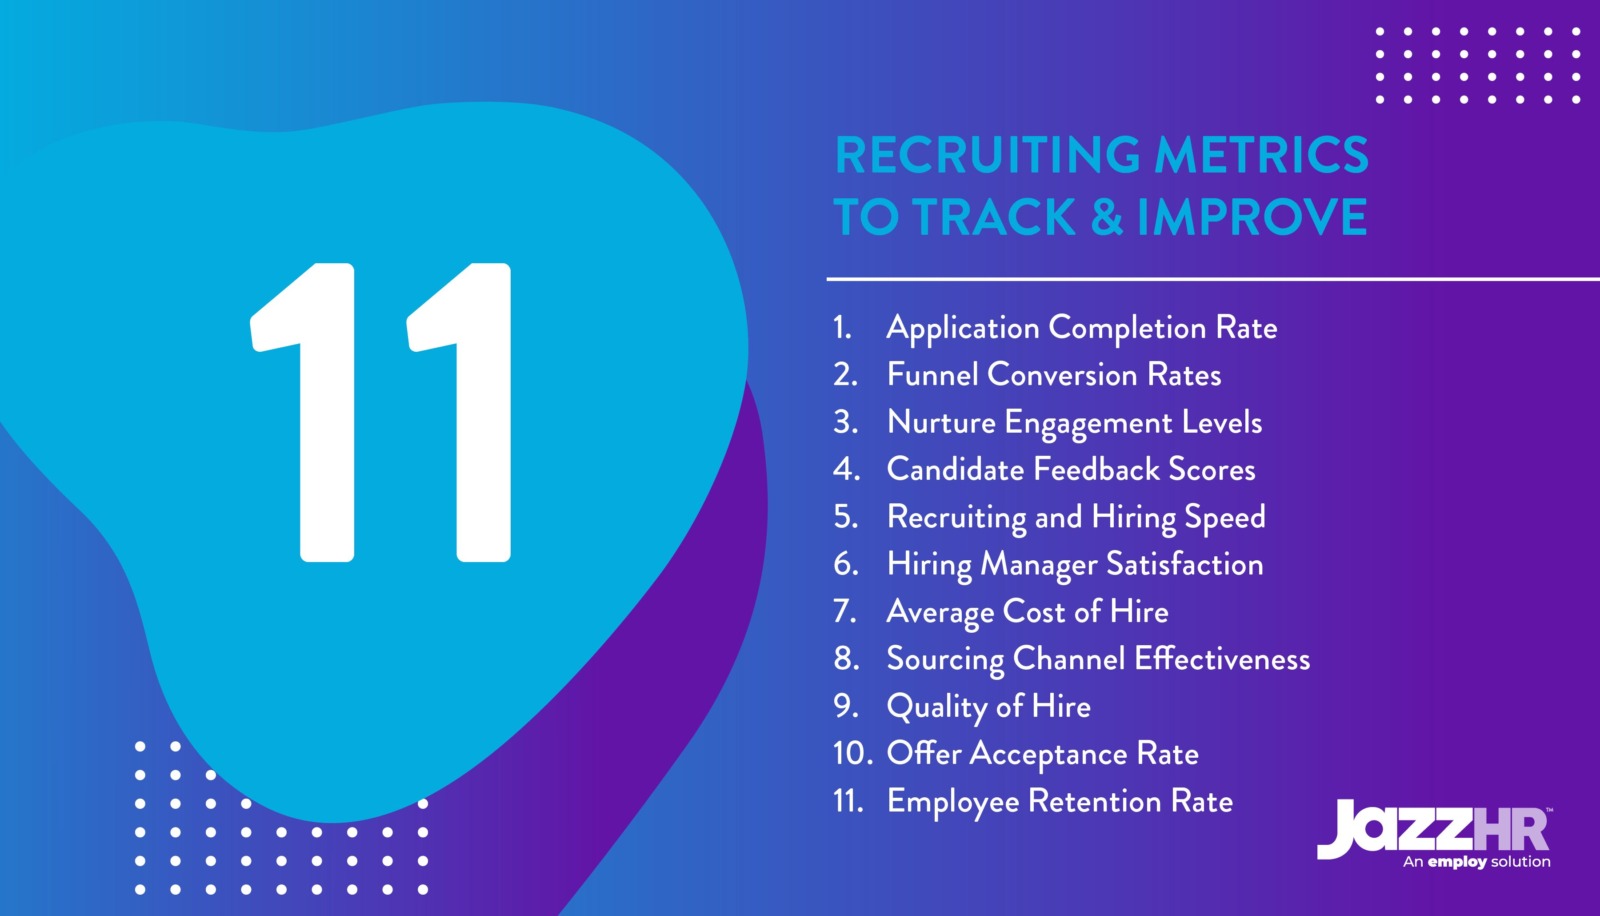 The top recruiting metrics your business should track (as explained below)